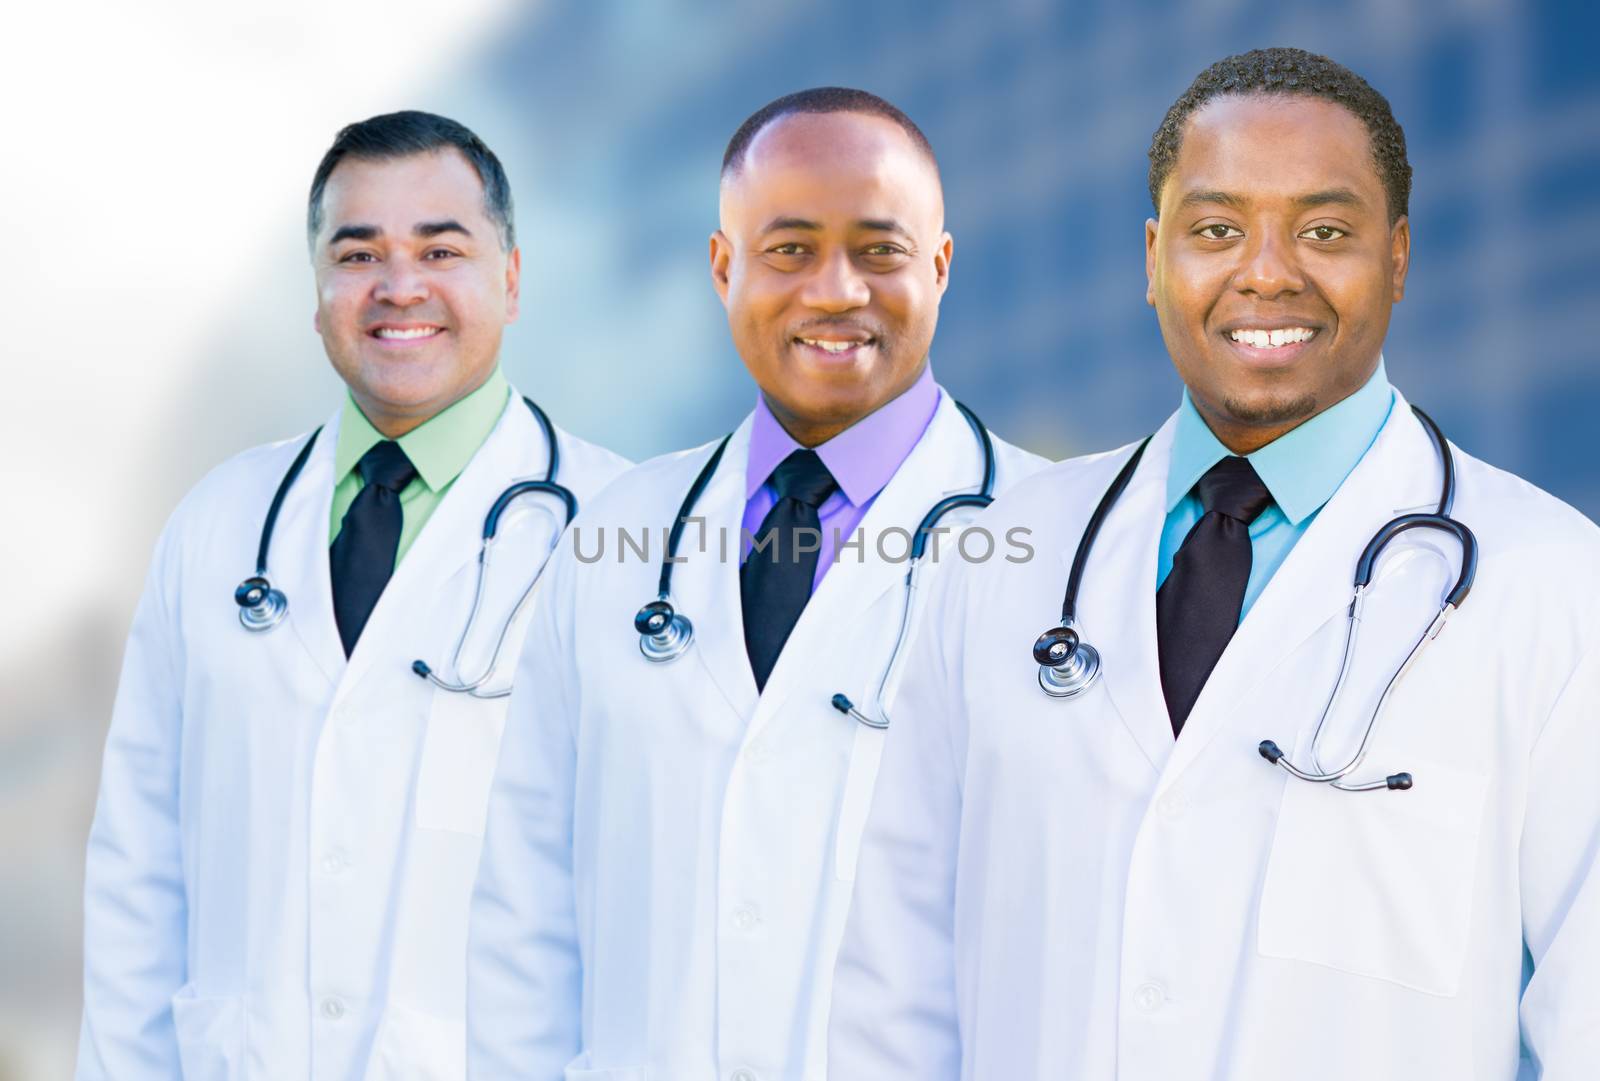 Handsome African American and Hispanic Male Doctors Outside of Hospital Building.